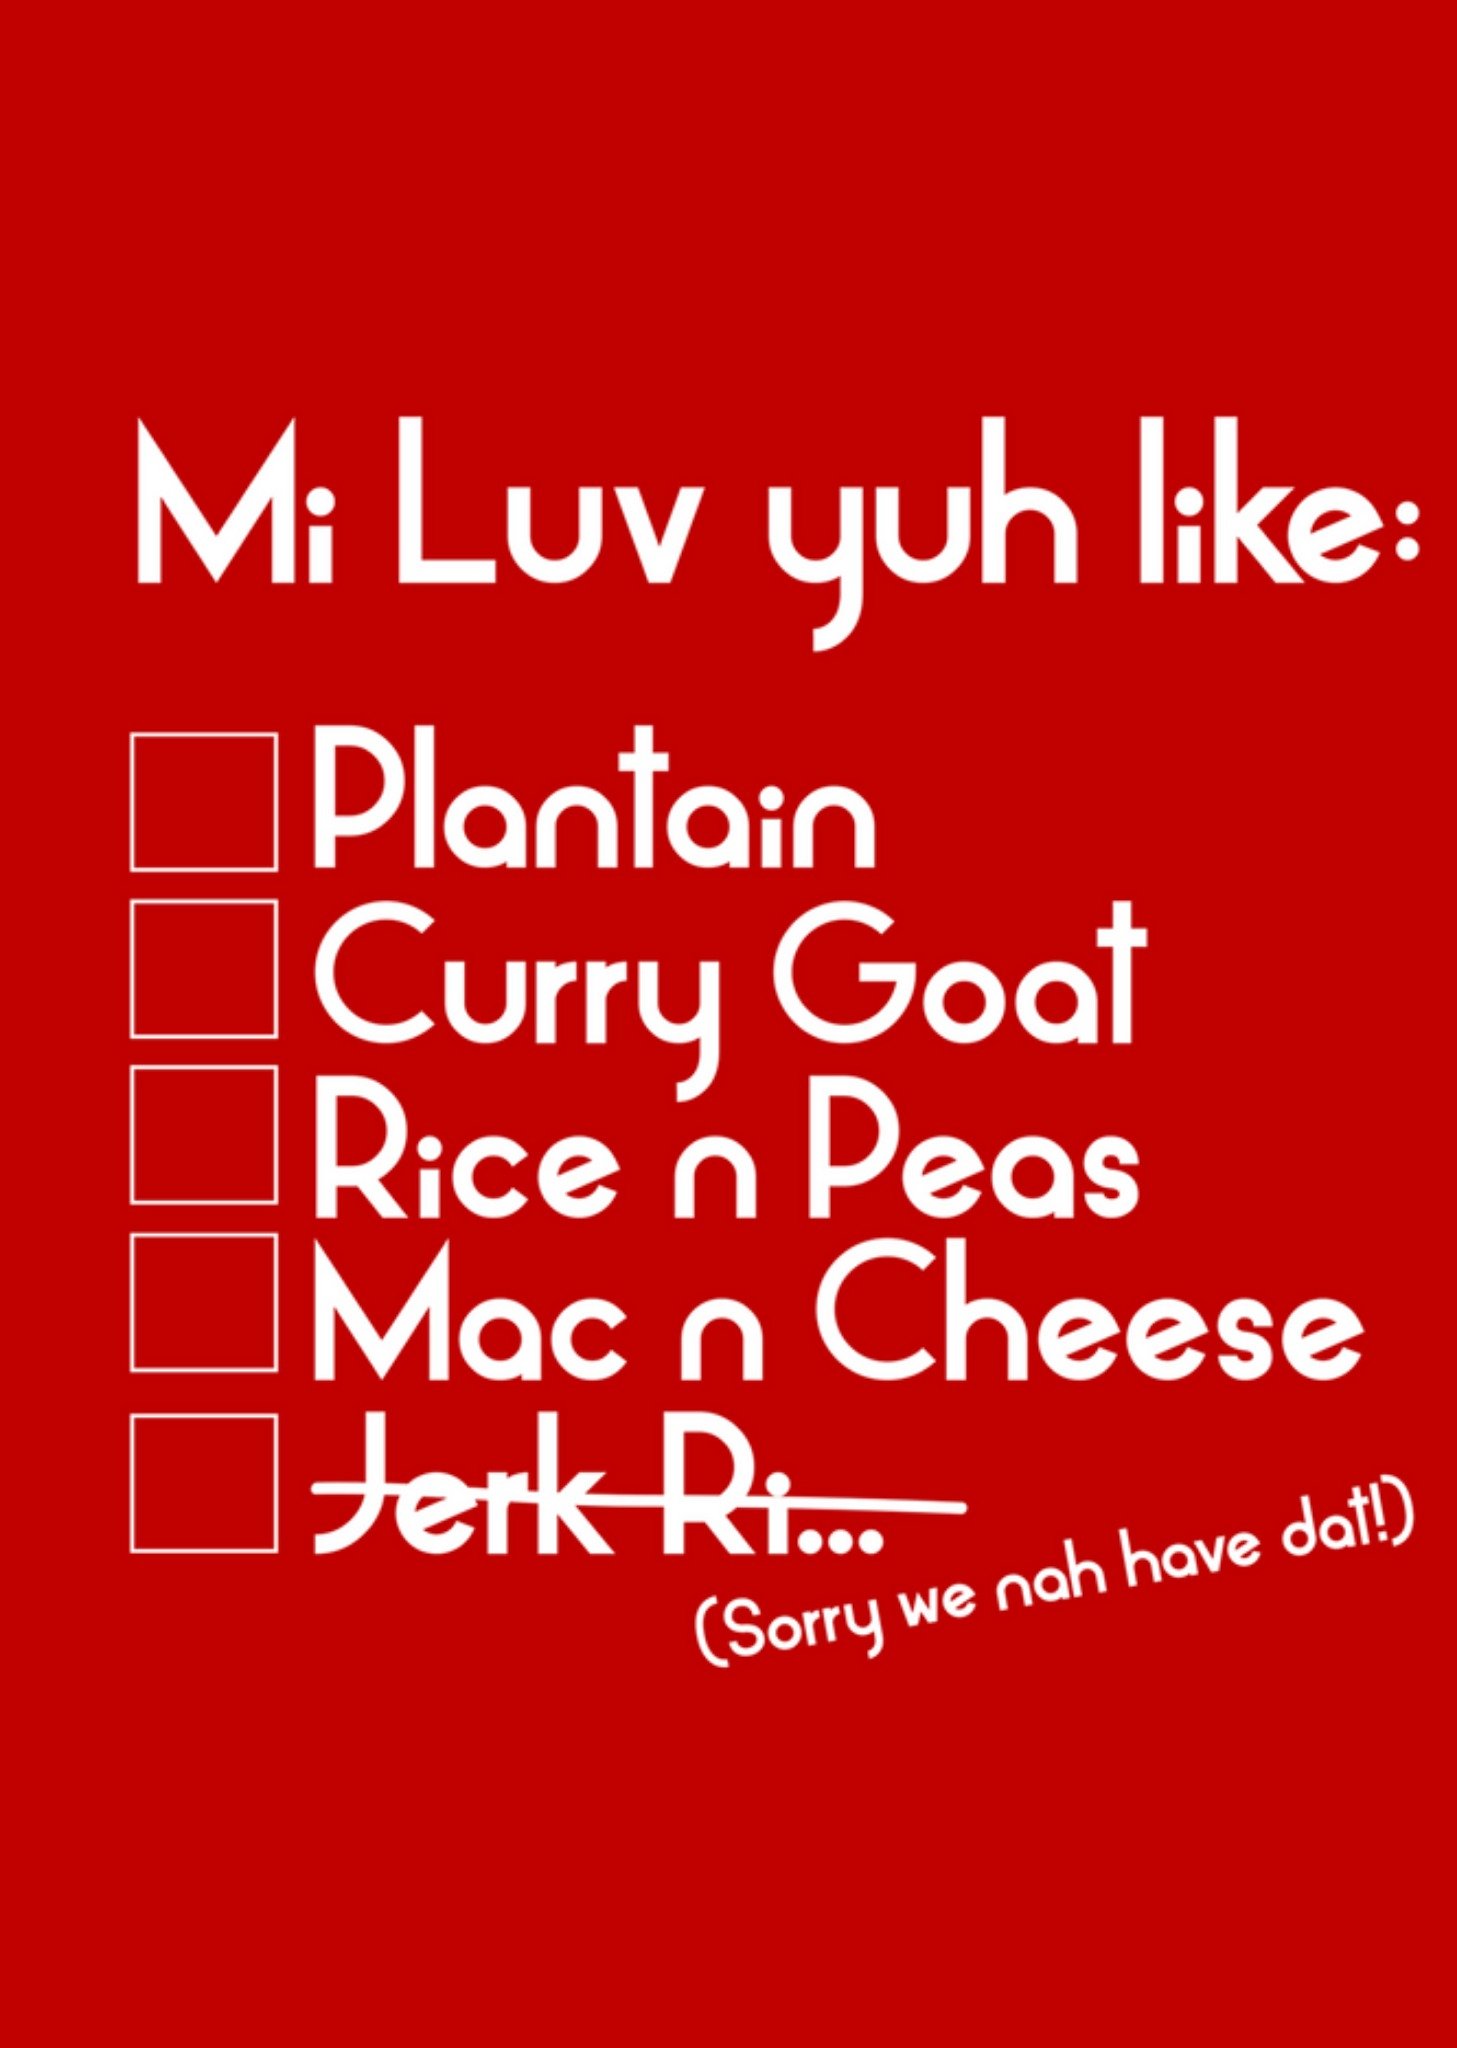 Moonpig Humorous Patois Mi Luv Yuh Like Tick List Typography Valentine's Day Card, Large